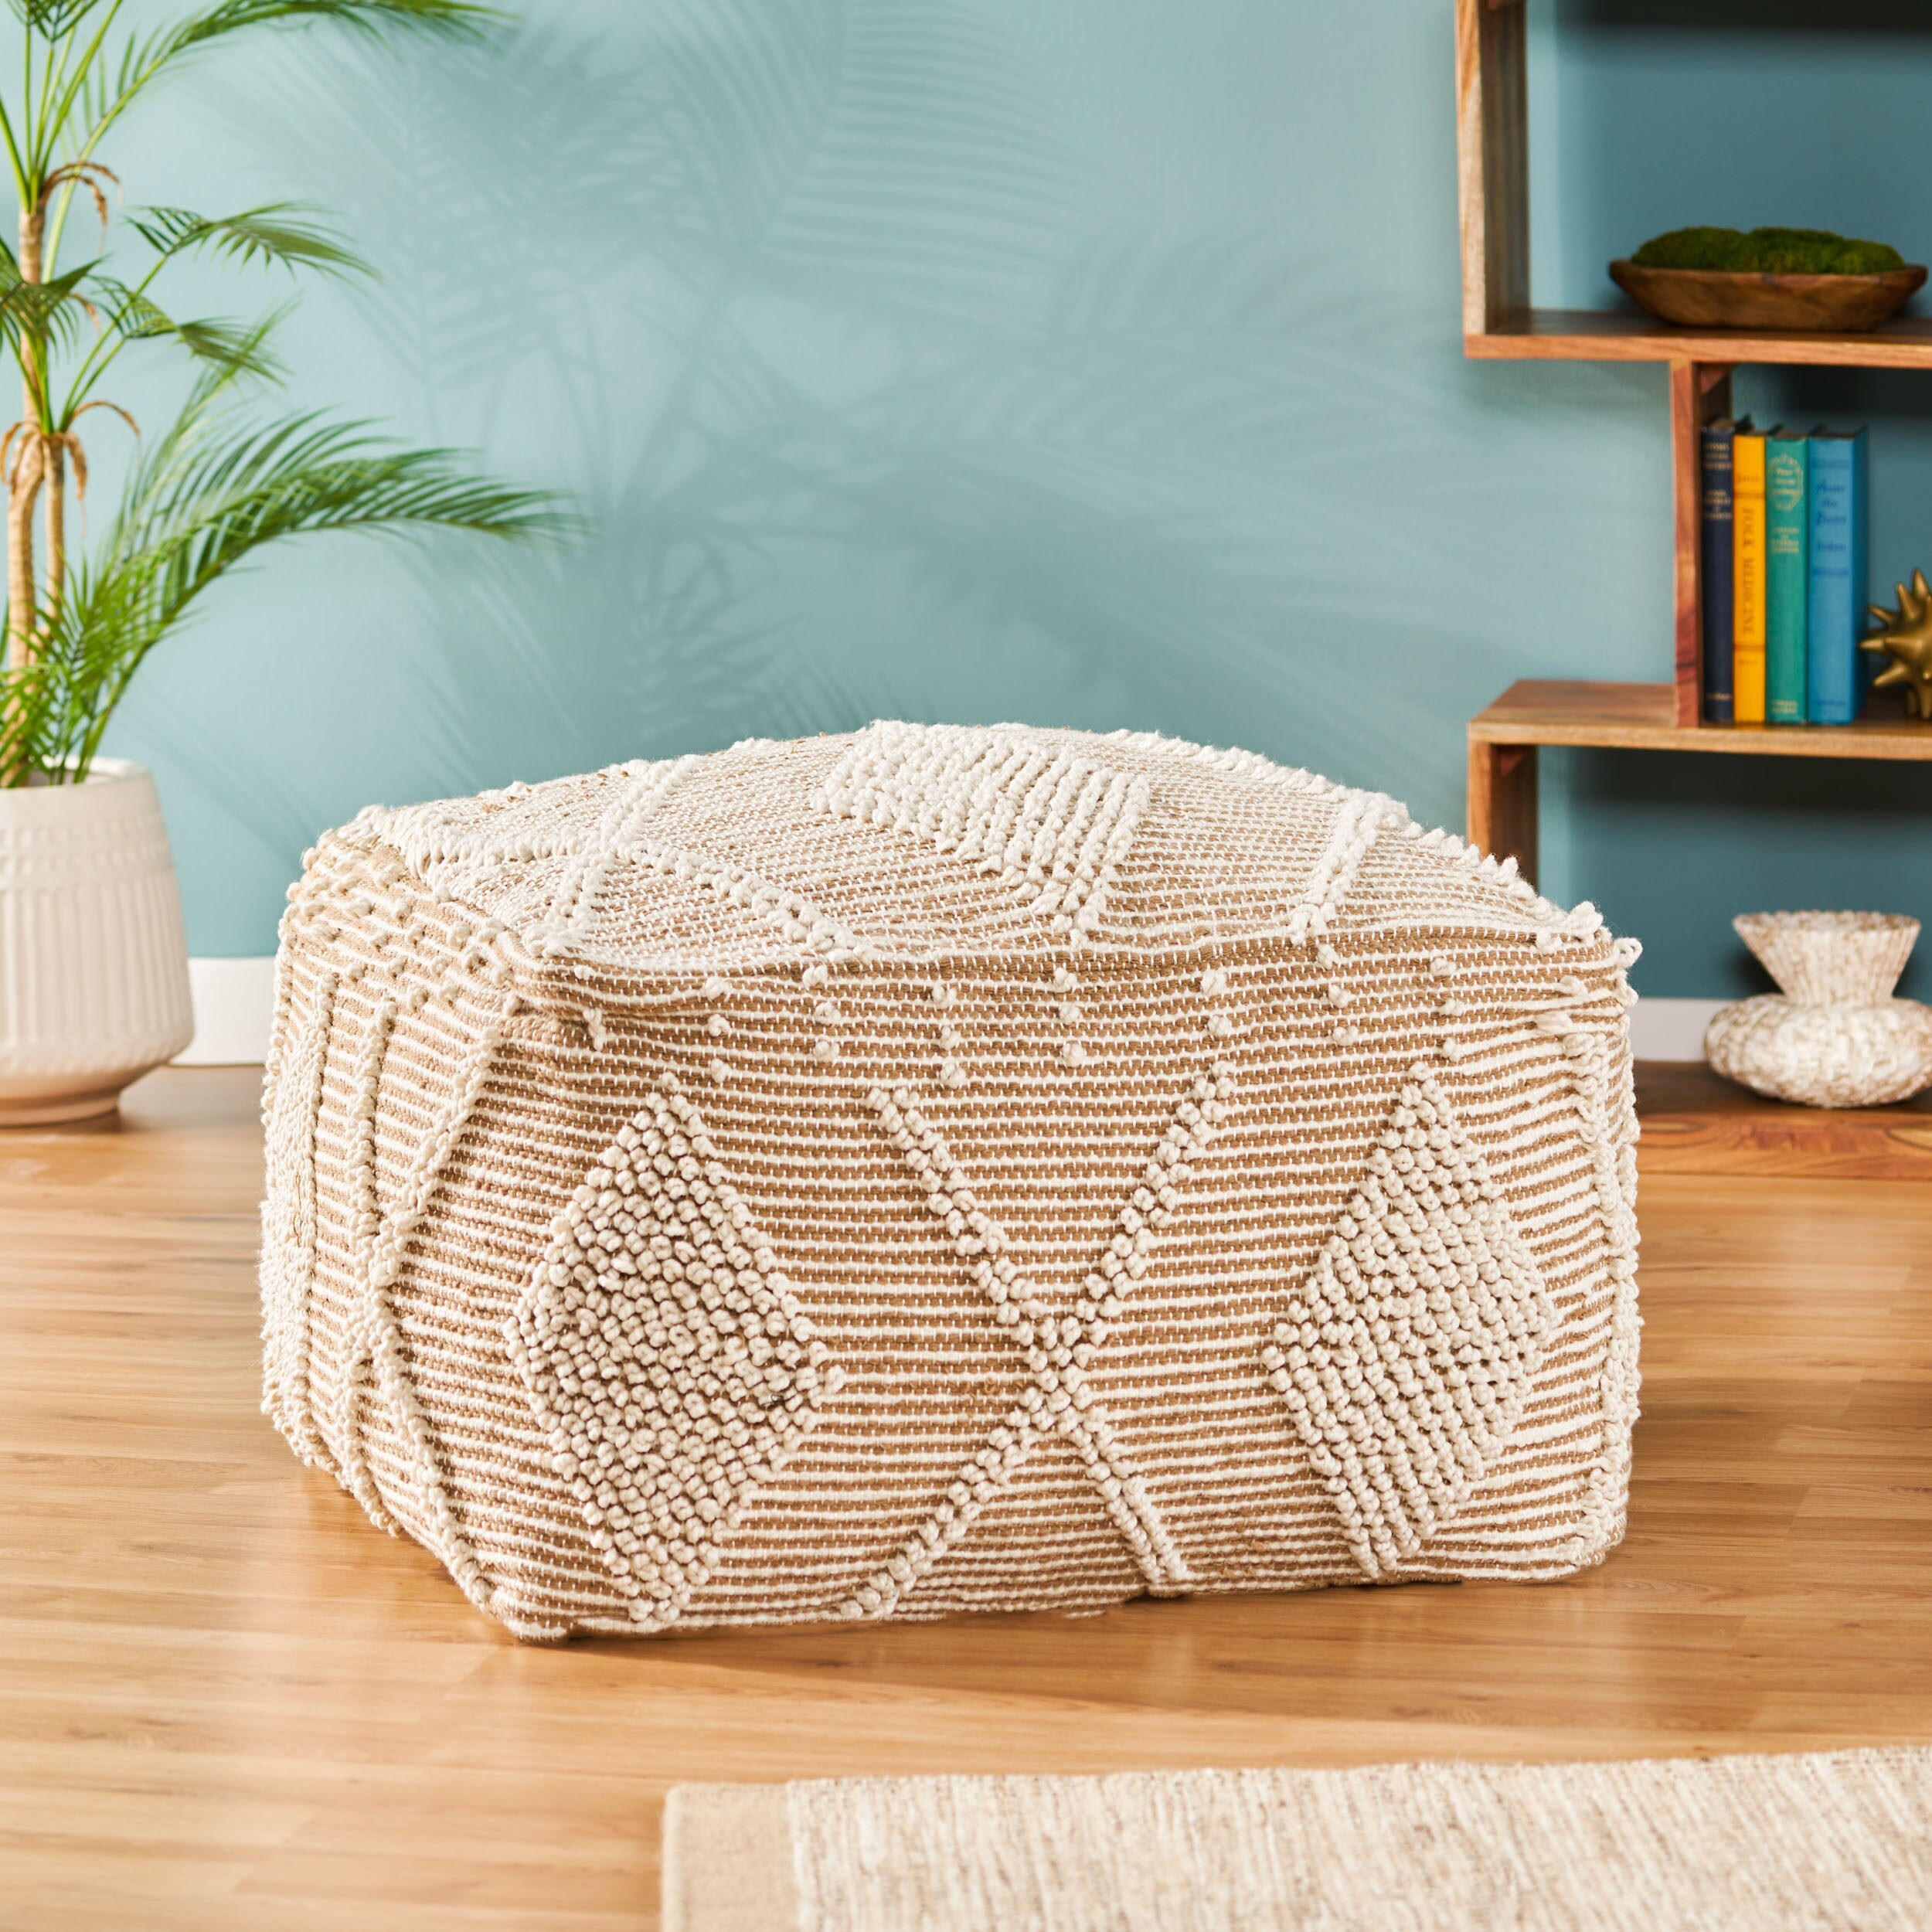 Boho Beige and Teal Yarn Great Deal Furniture 307628 Georgia Outdoor Large Square Casual Pouf 